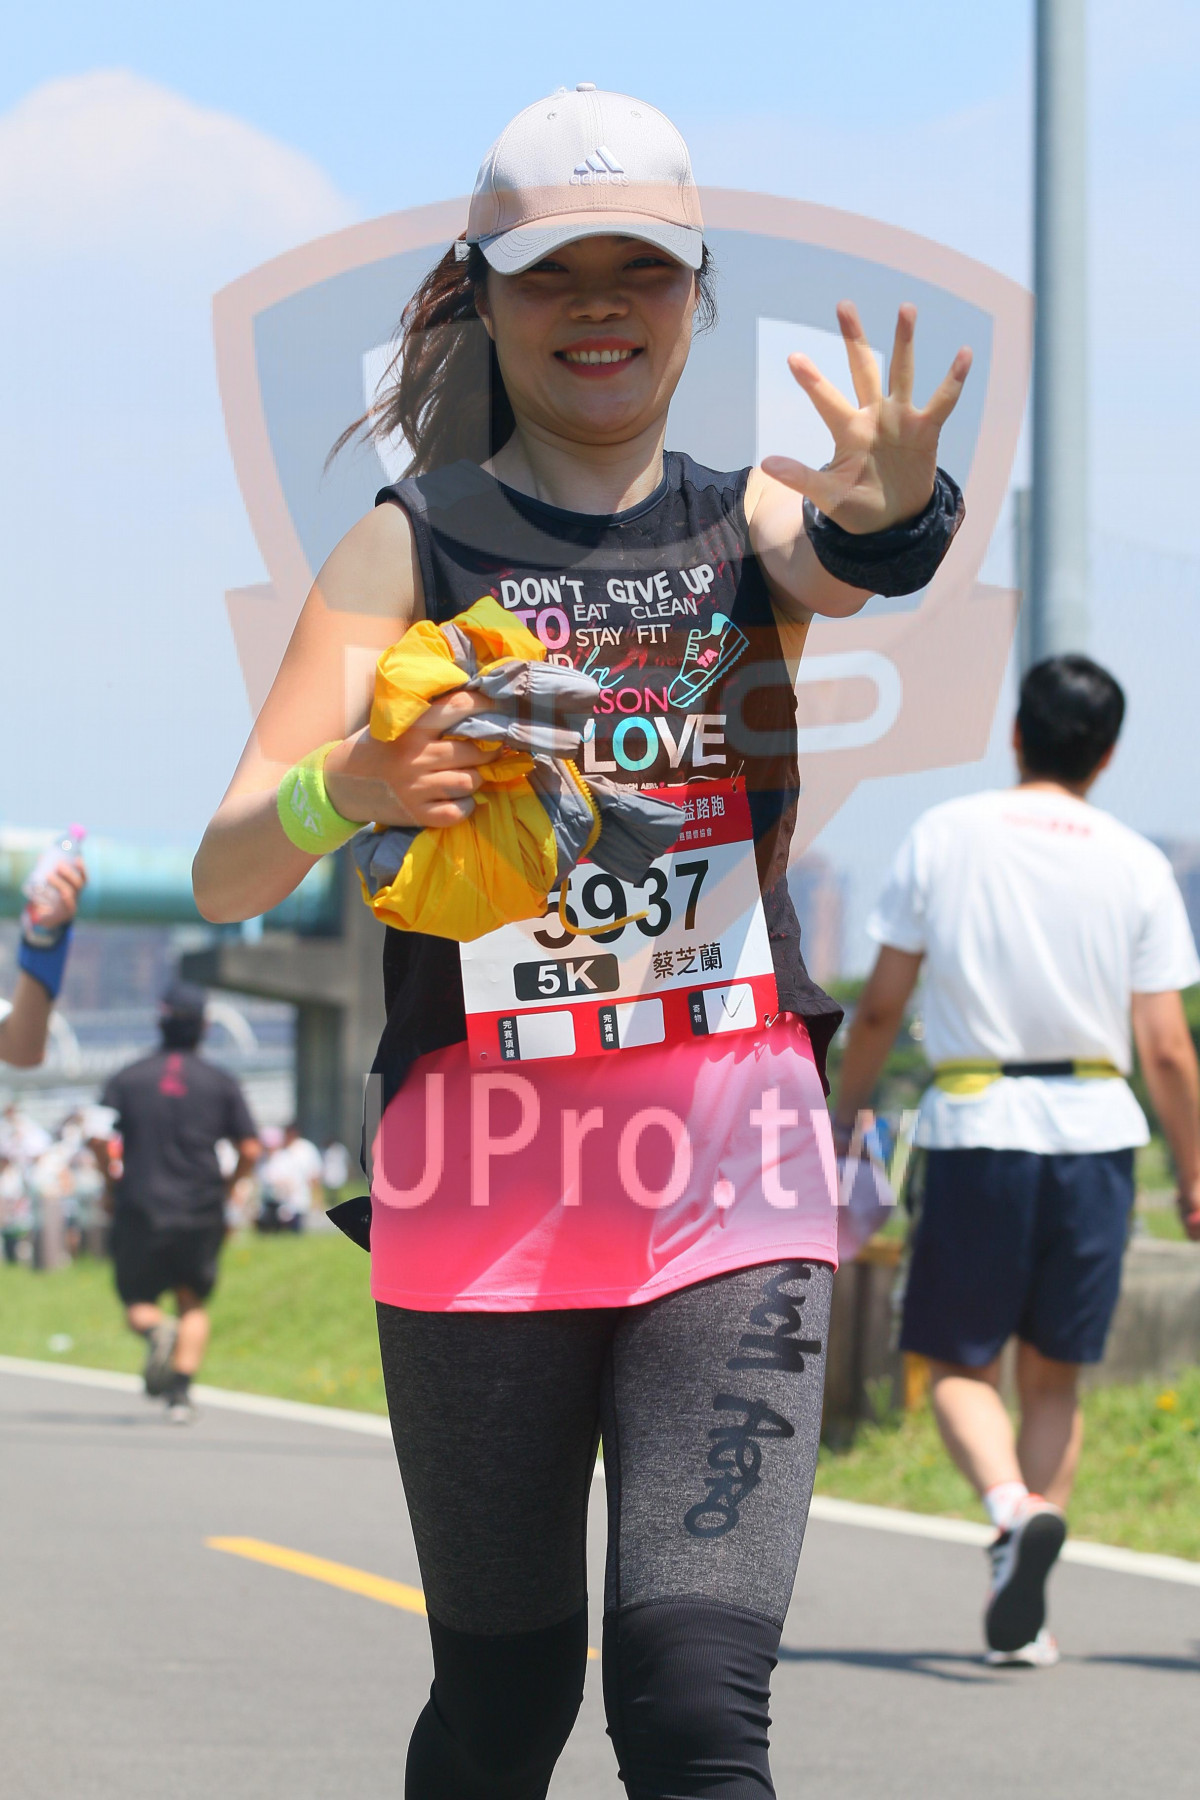 DON'T GIVE UP,EAT CLEAN,AY,FIT,ON,LOVE,,,3937,5K,,,|小碧潭公園附近-7|